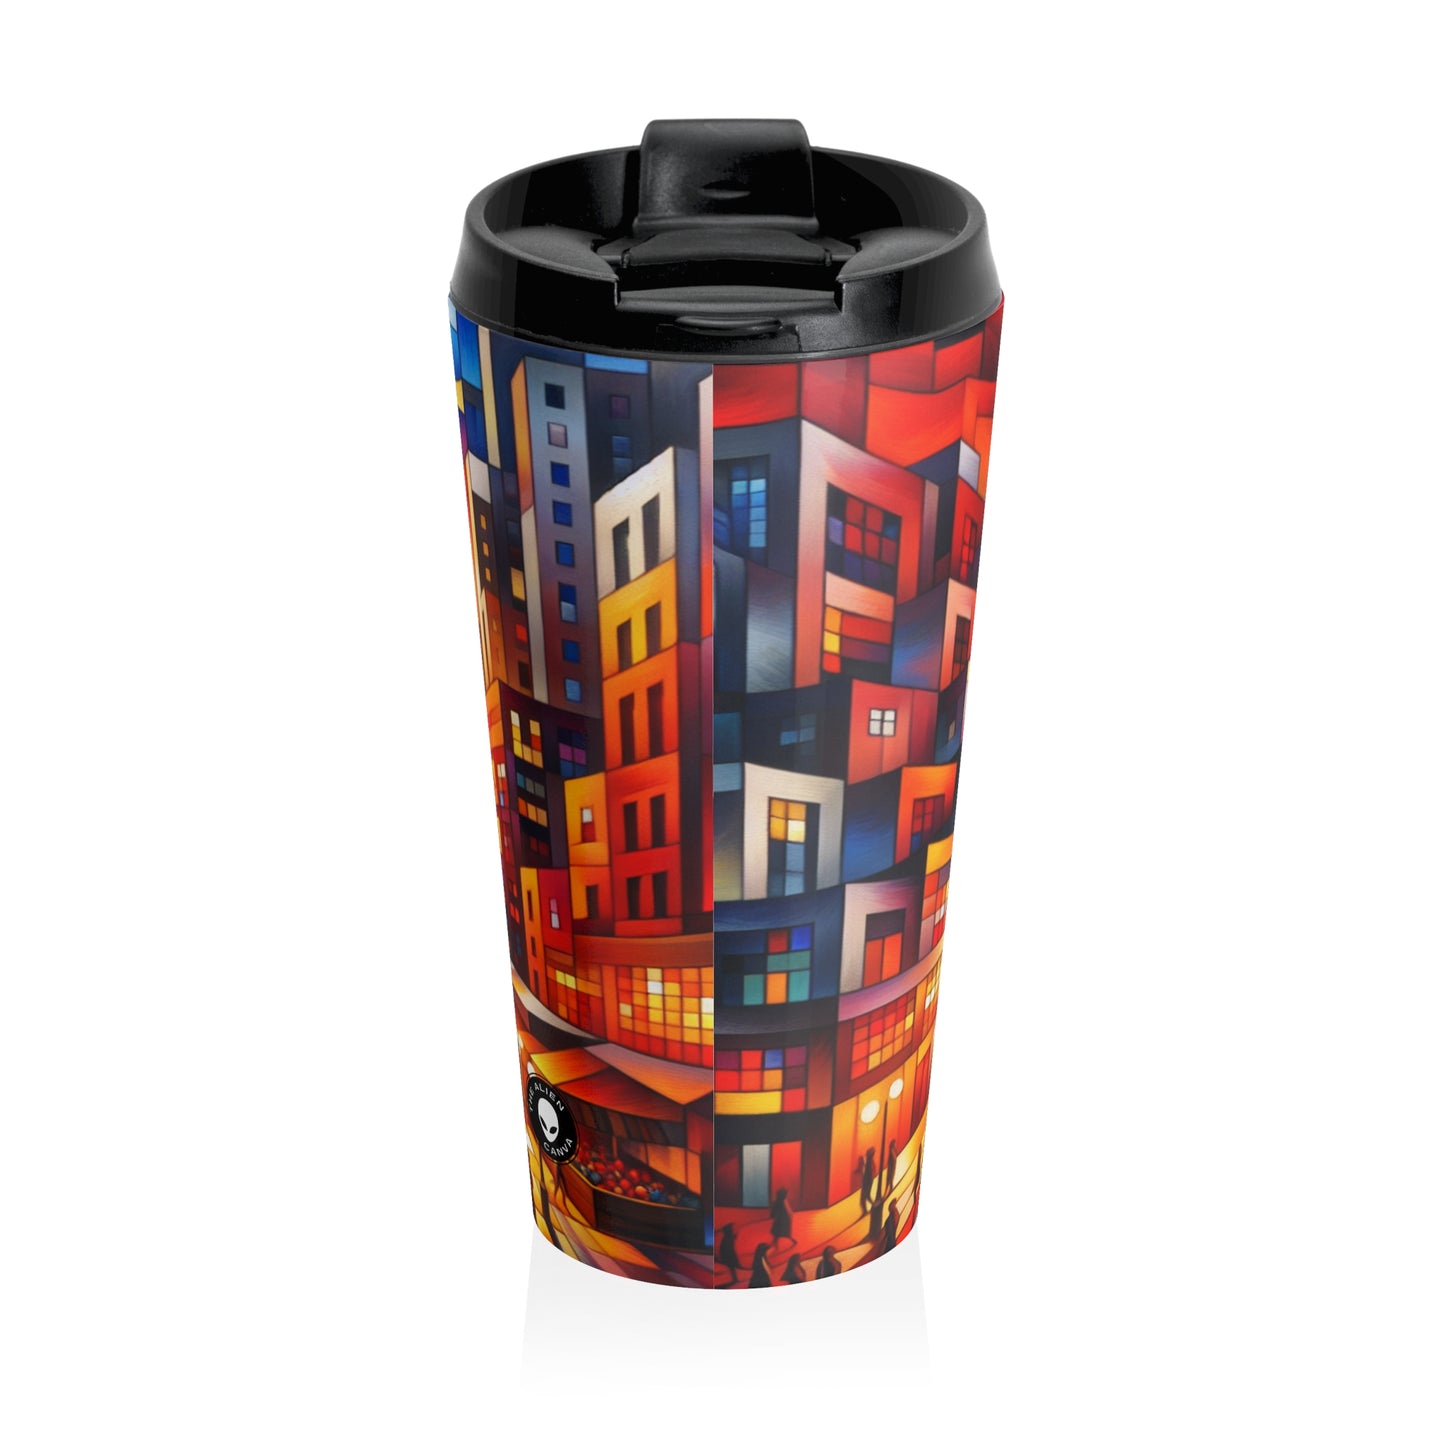 "Deconstructing Reality: A Chaotic Collage of Power and Perception" - The Alien Stainless Steel Travel Mug Post-structuralist Art